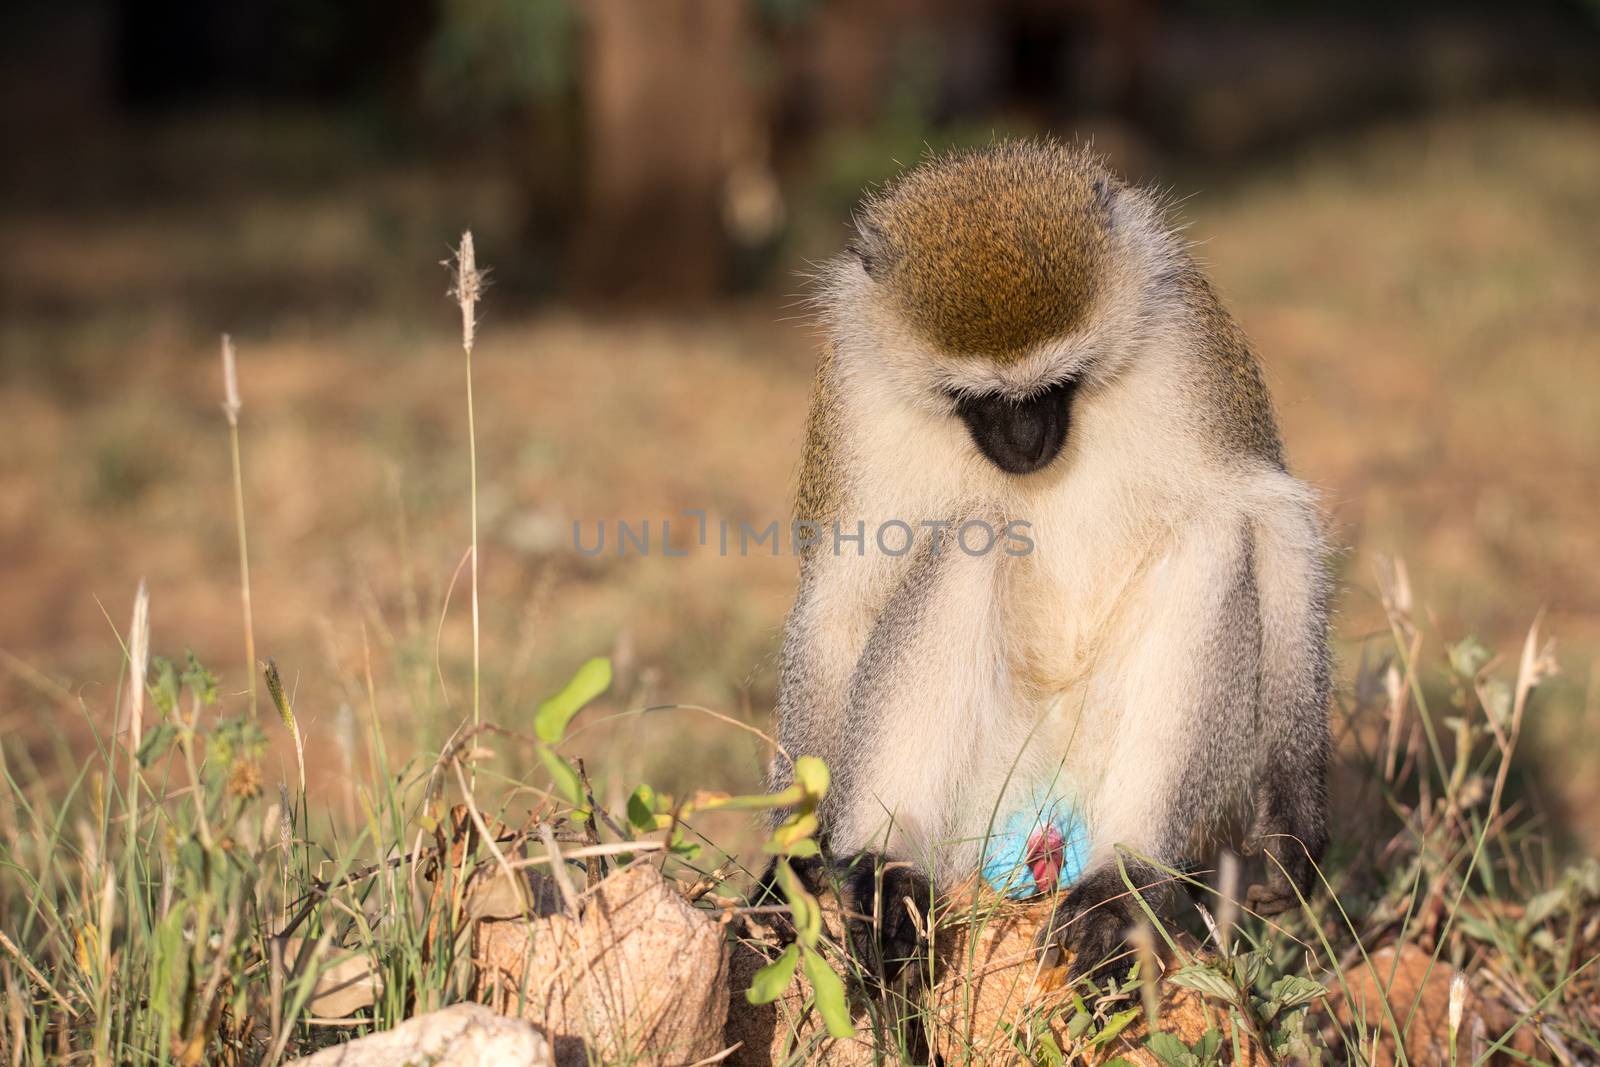 The monkey sits and looks around